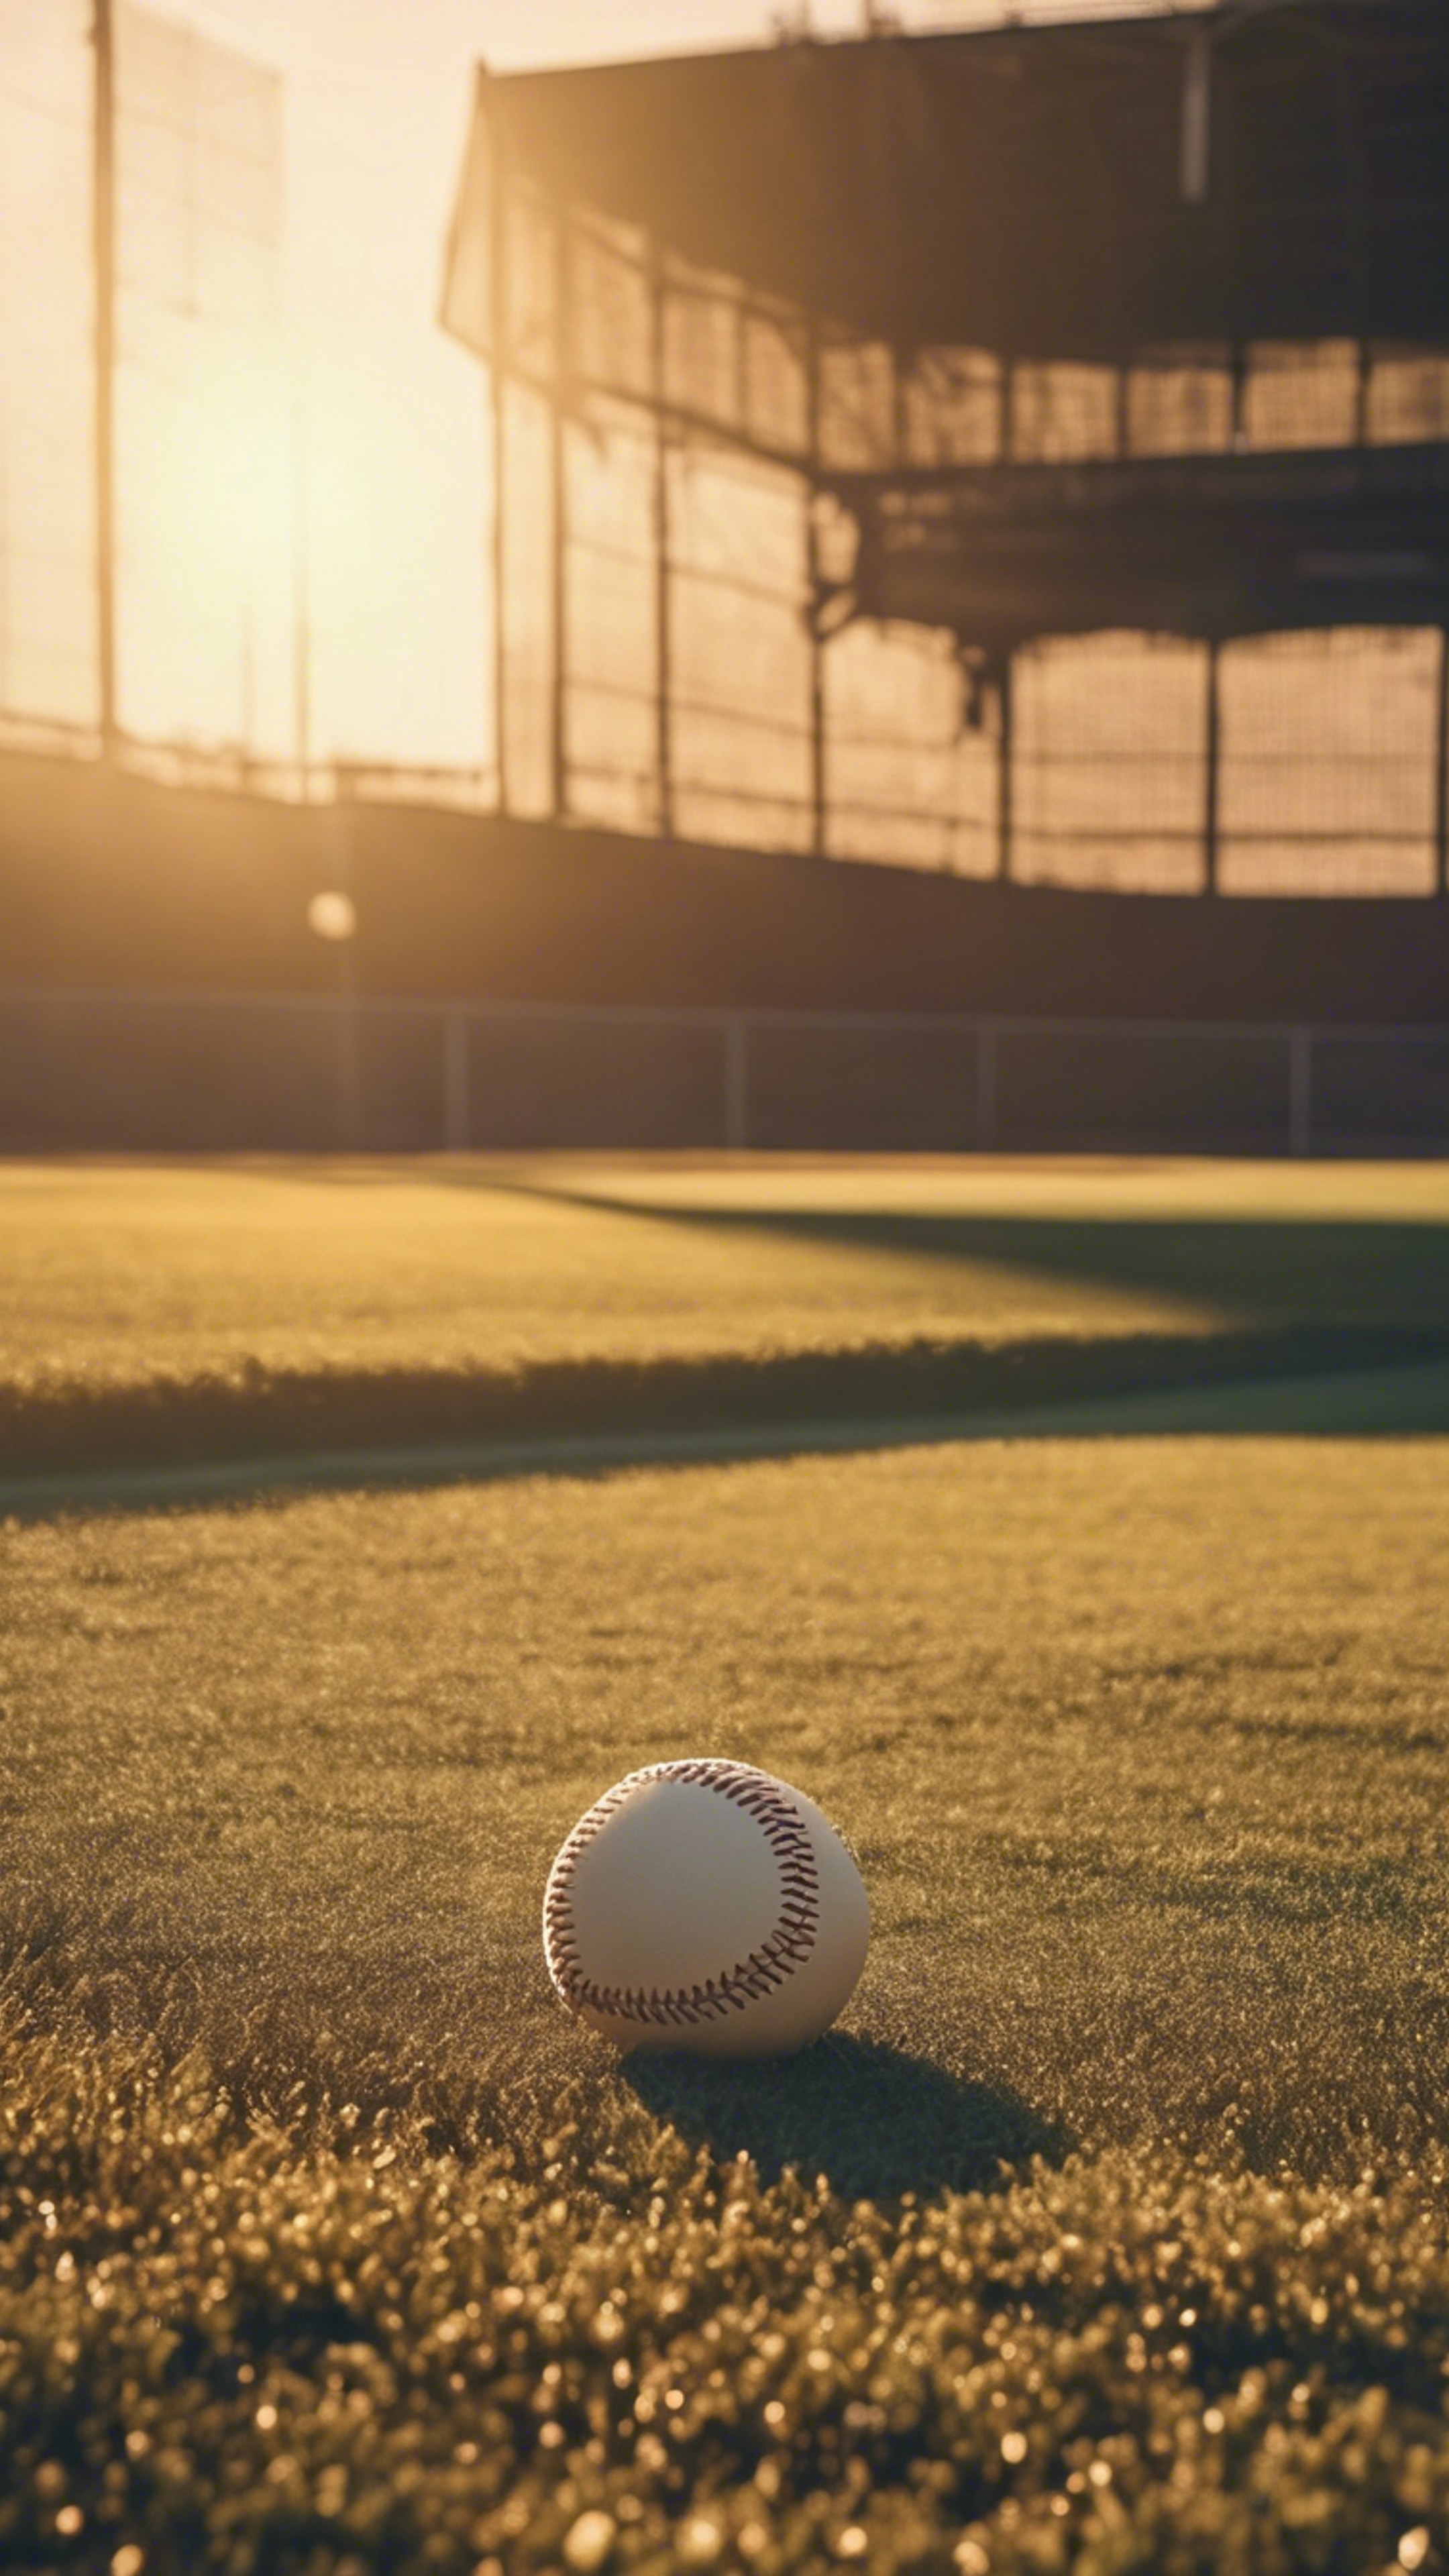 A well manicured baseball field, bathed in the golden rays of a setting sun. Tapeta[a377ce6b387a4eee98b8]